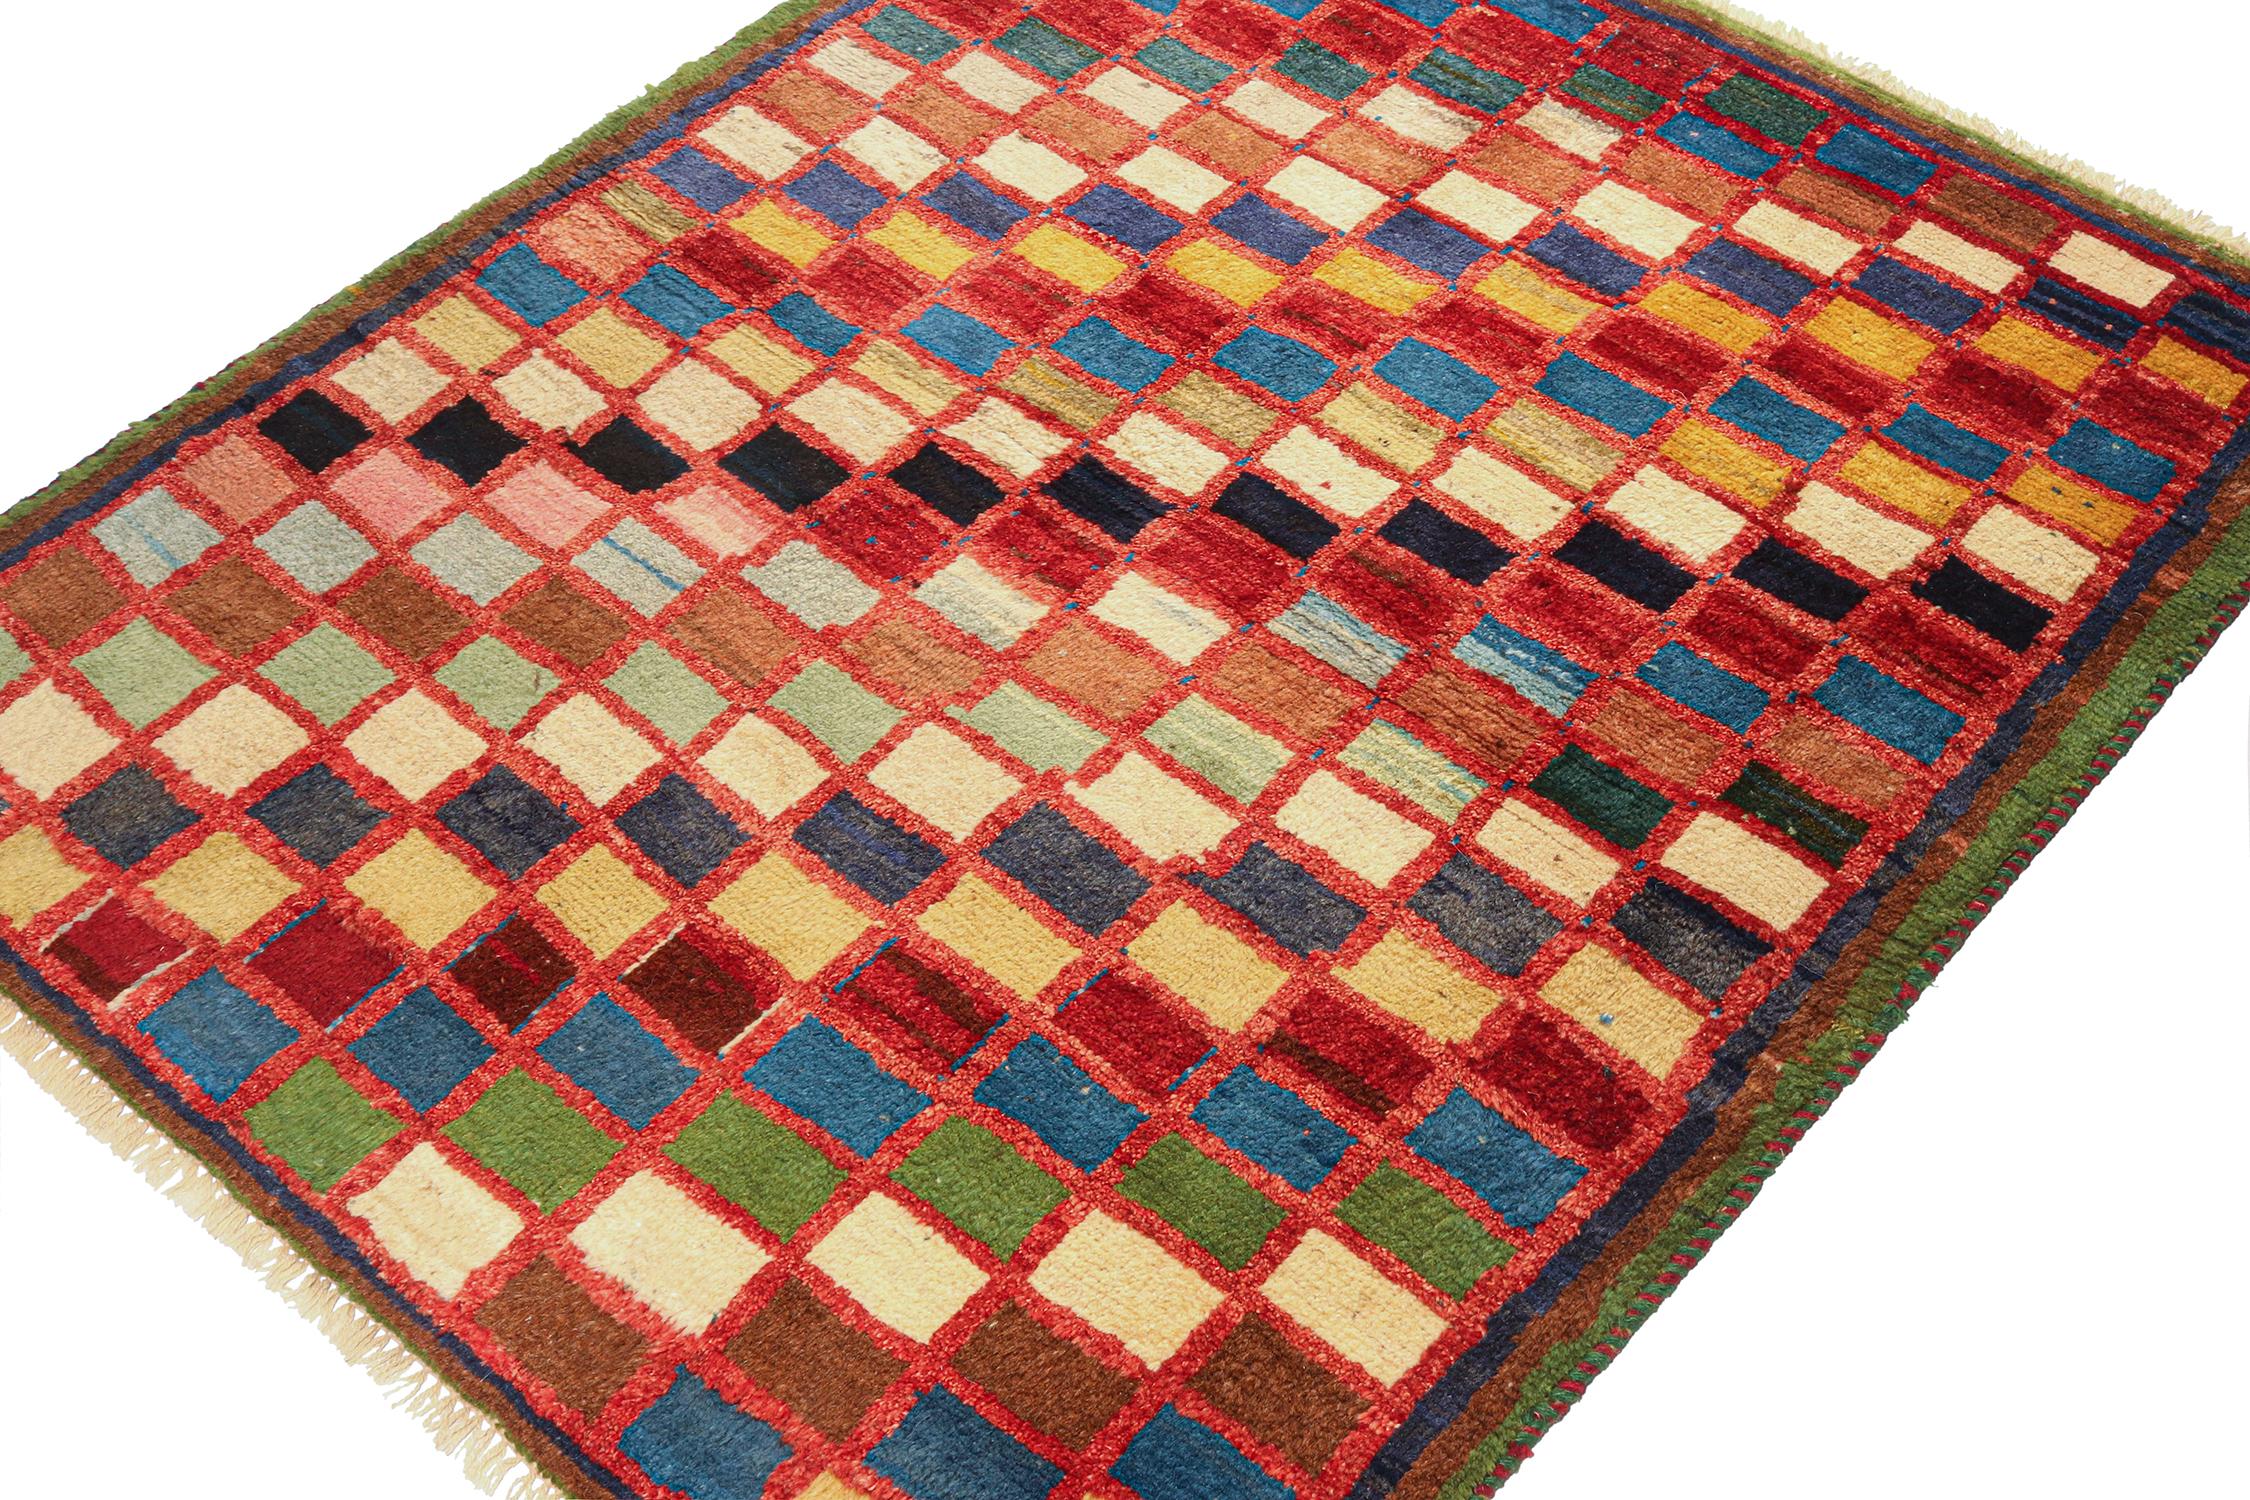 This vintage 4x5 Persian Gabbeh rug makes a splendid entry to Rug & Kilim’s curation of rare tribal pieces. Hand-knotted in wool circa 1950-1960.

On the Design:

The piece features a playful geometric pattern in a joyful range of beige-brown,